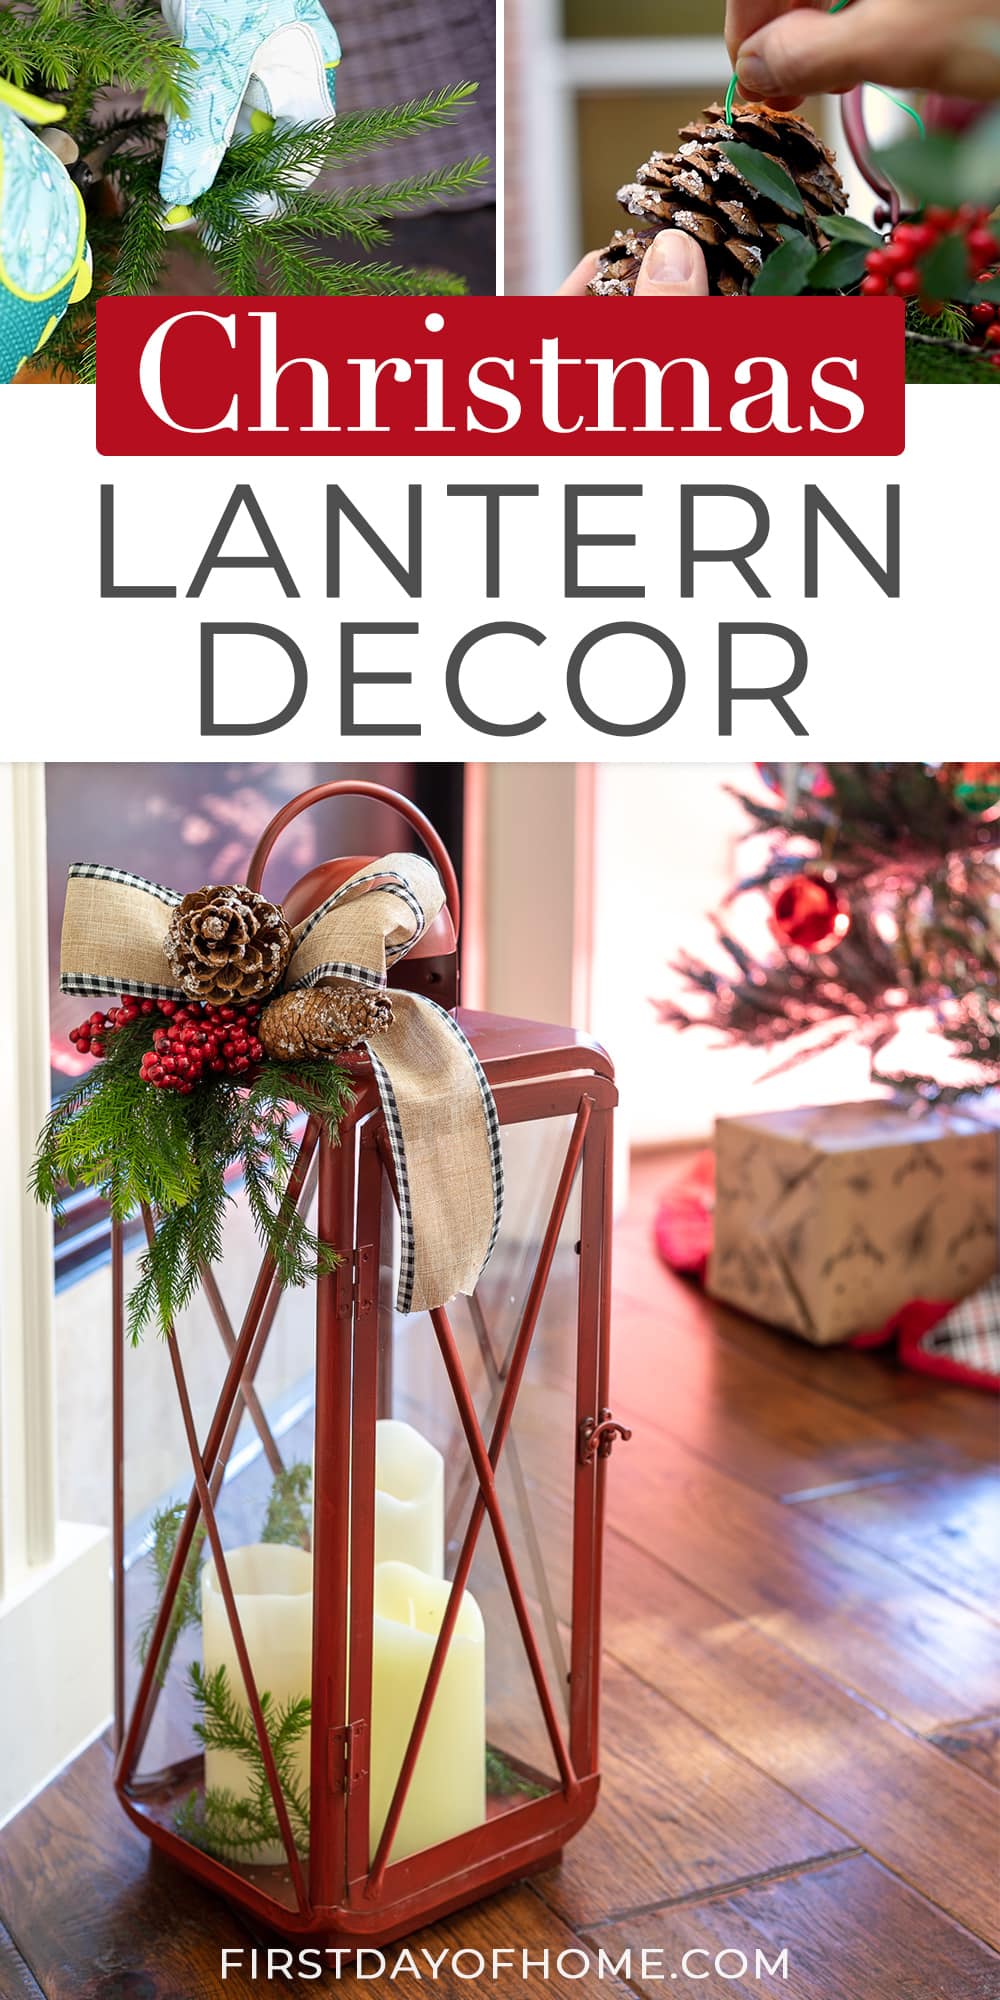 Collage of Christmas lantern decor and greenery and pinecones used to decorate the lantern. Text overlay reads "Christmas Lantern Decor".